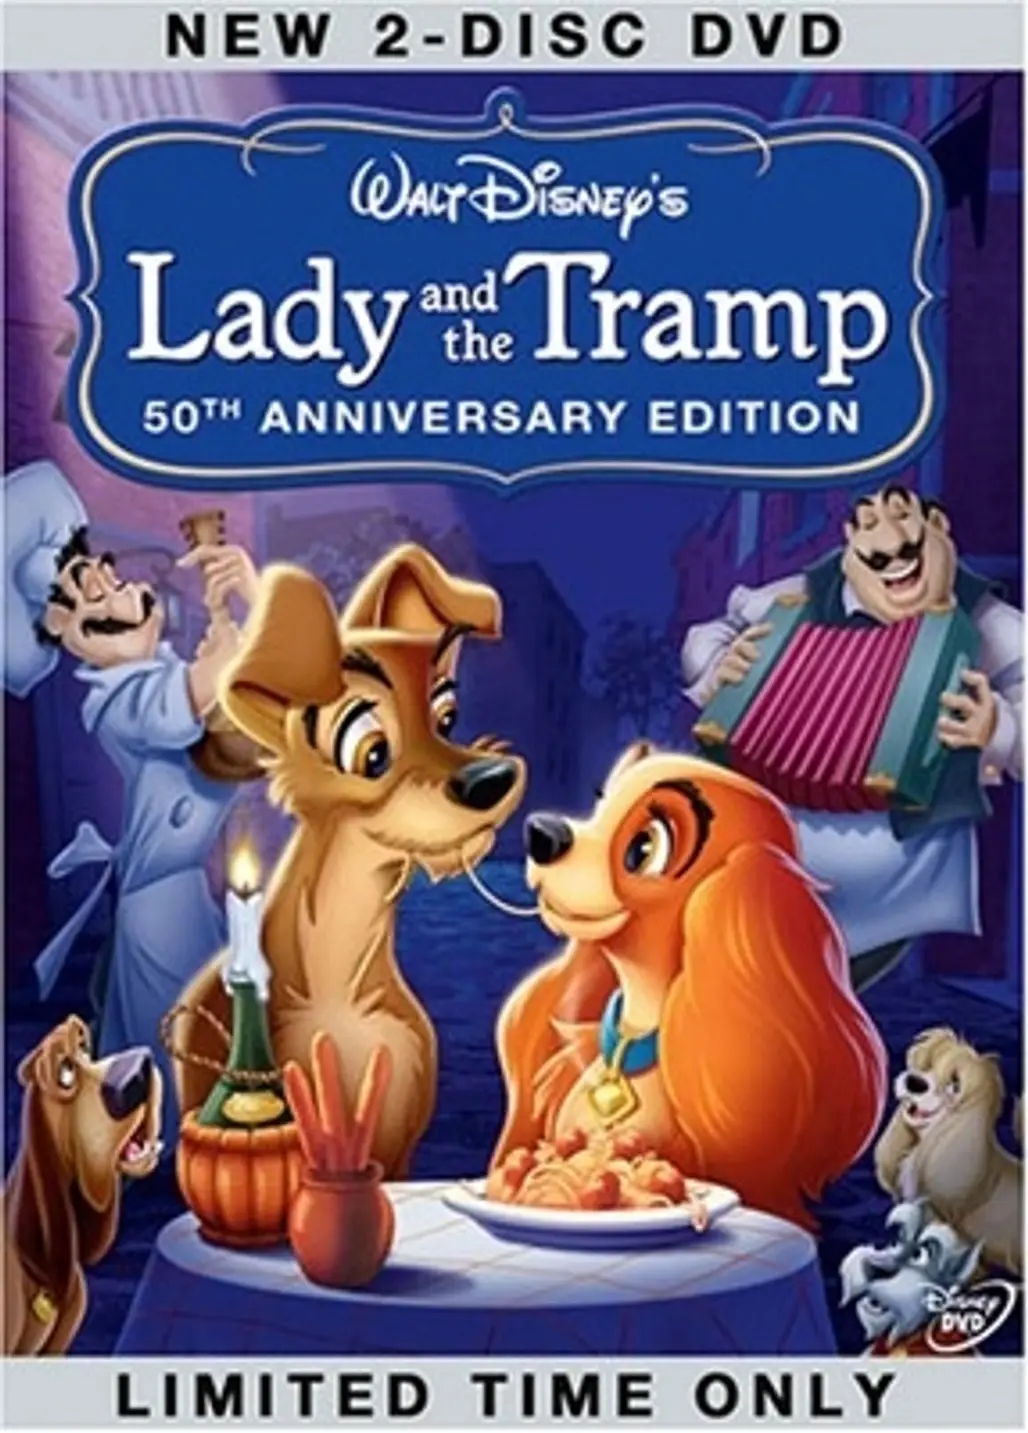 Lady and Tramp (Lady and the Tramp)